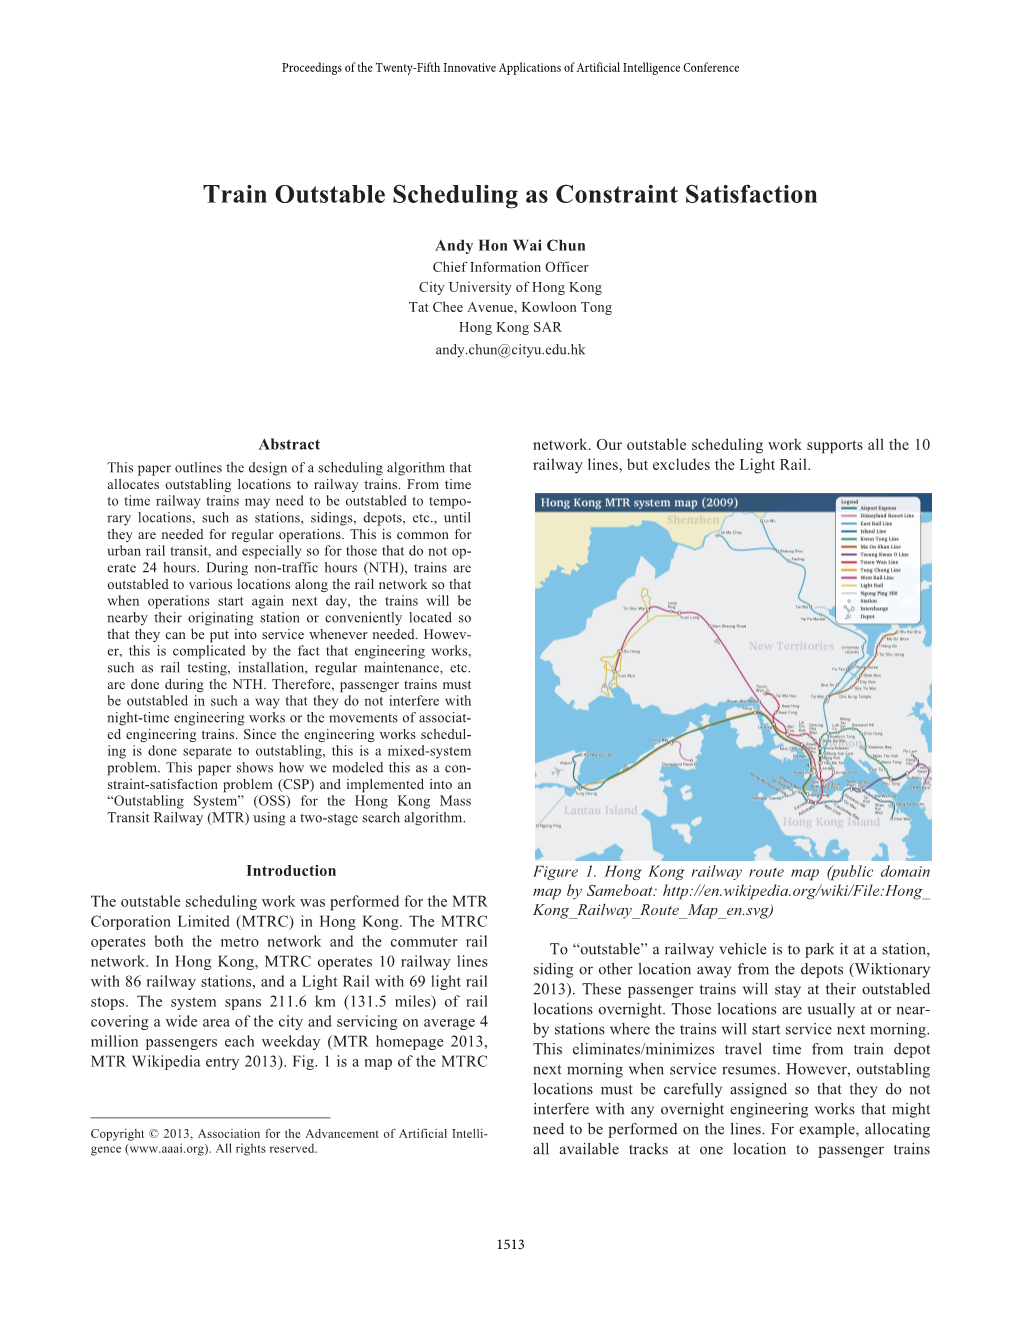 Train Outstable Scheduling As Constraint Satisfaction